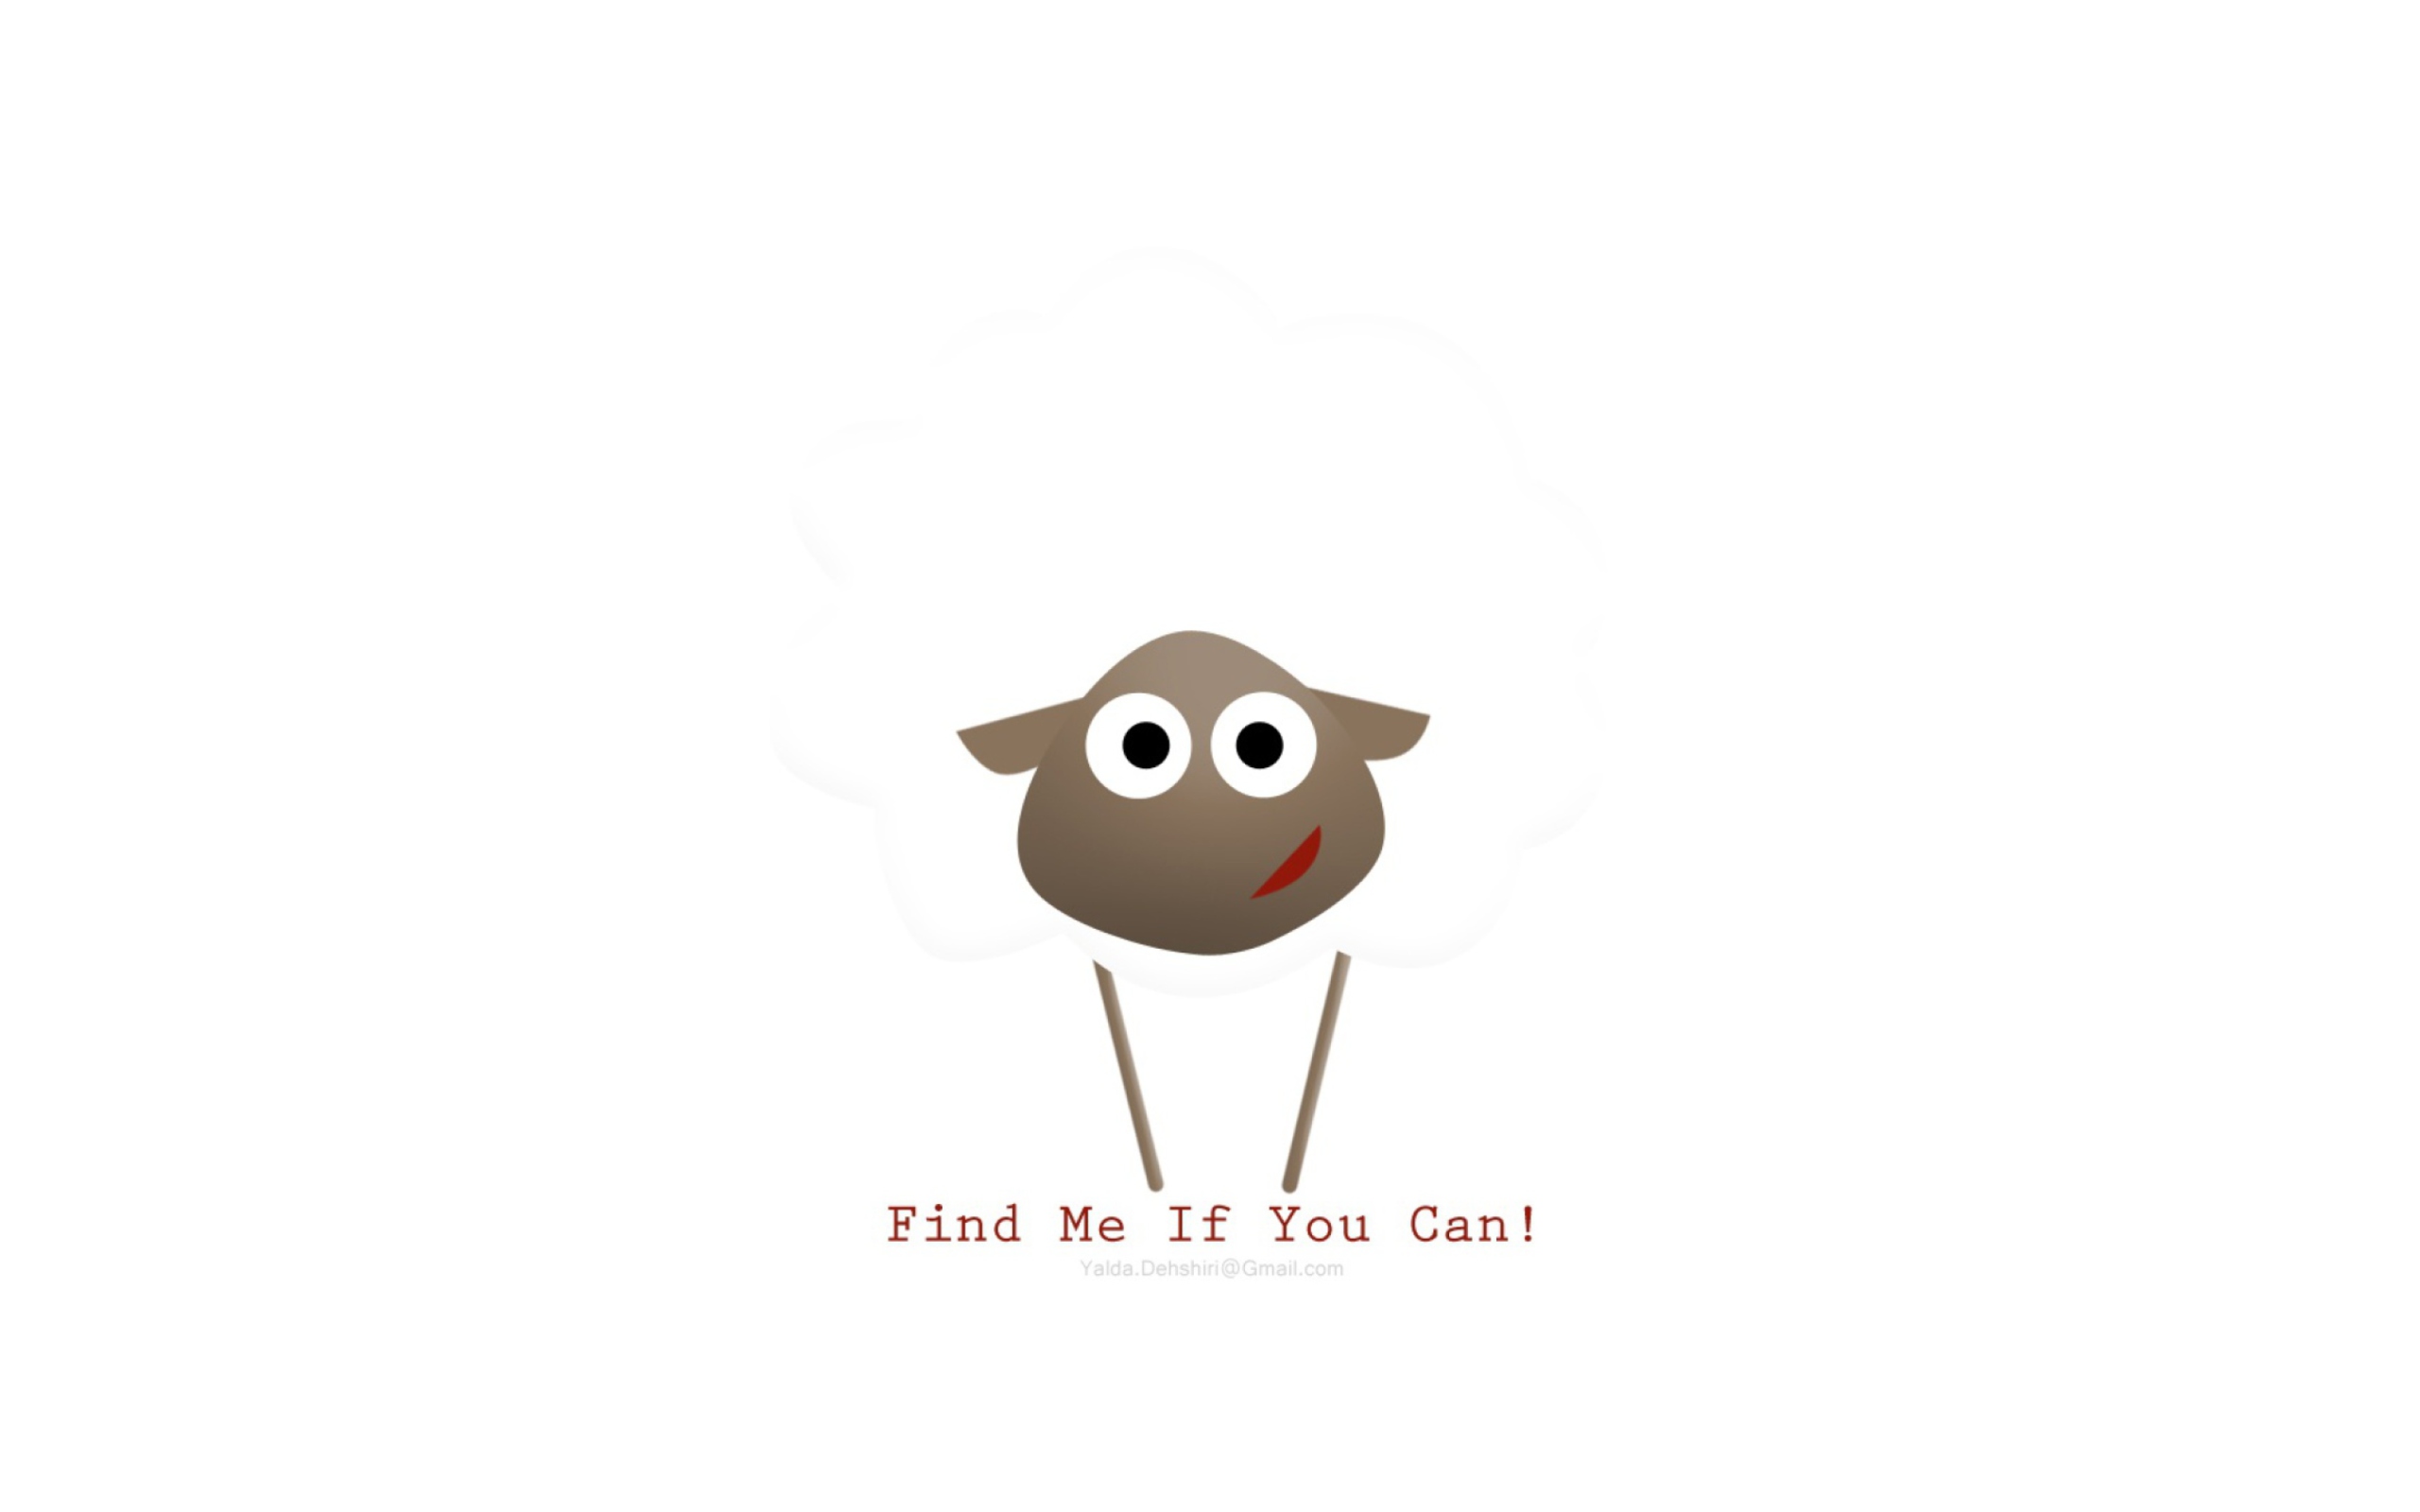 Das Find Me If You Can Wallpaper 2560x1600